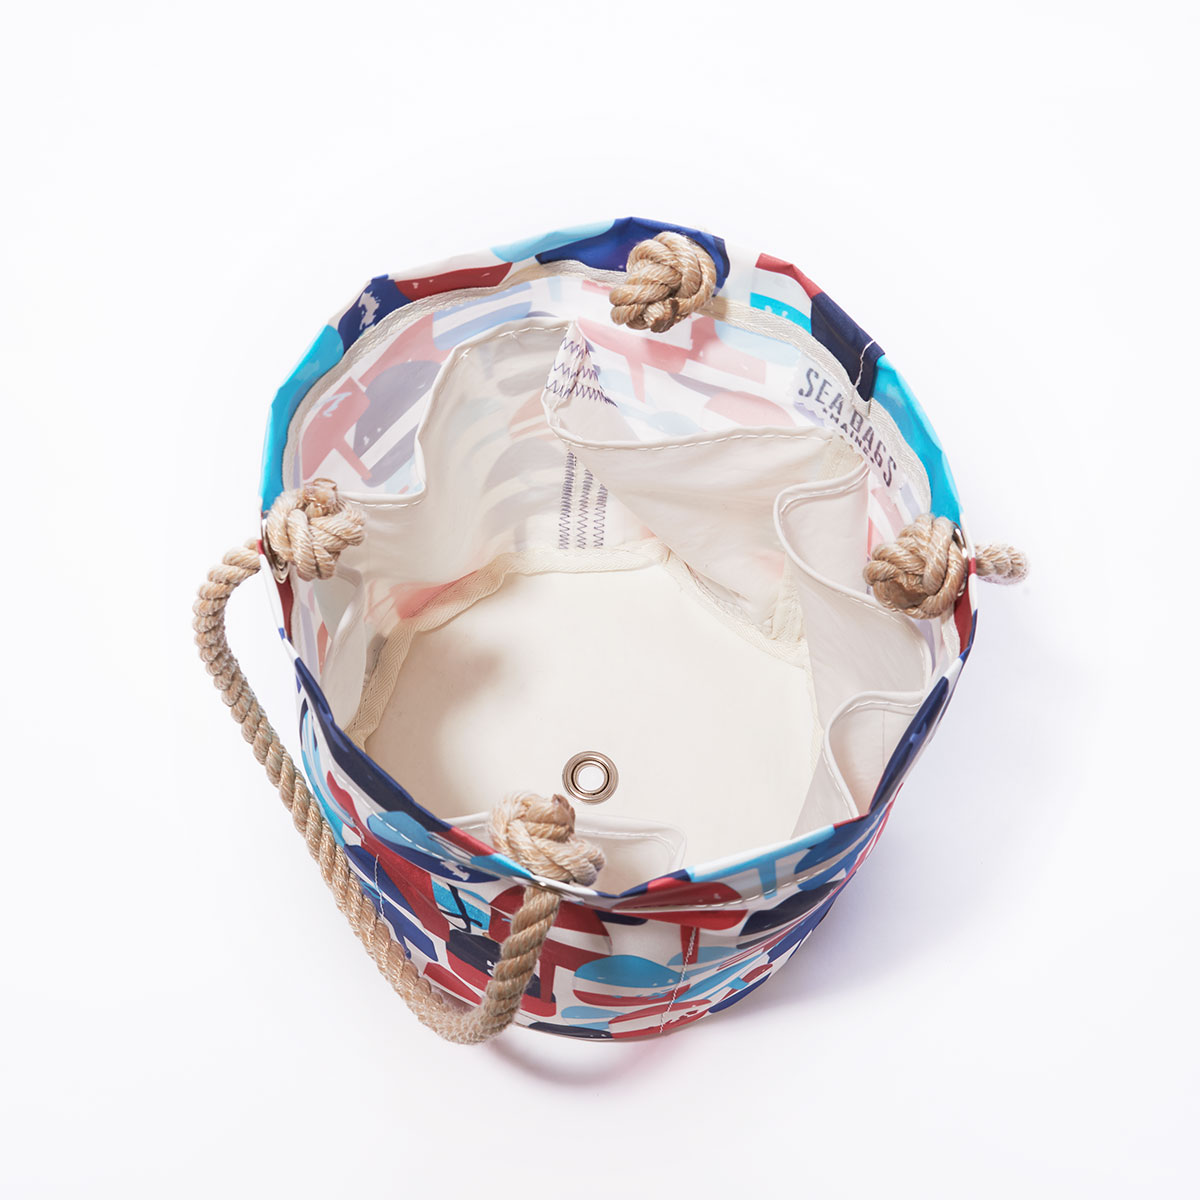 inside view of bottle pockets: a recycled sail cloth beverage bucket bag with hemp rope handles is emblazoned with a variety of printed buoys in reds and blues in different shapes and sizes